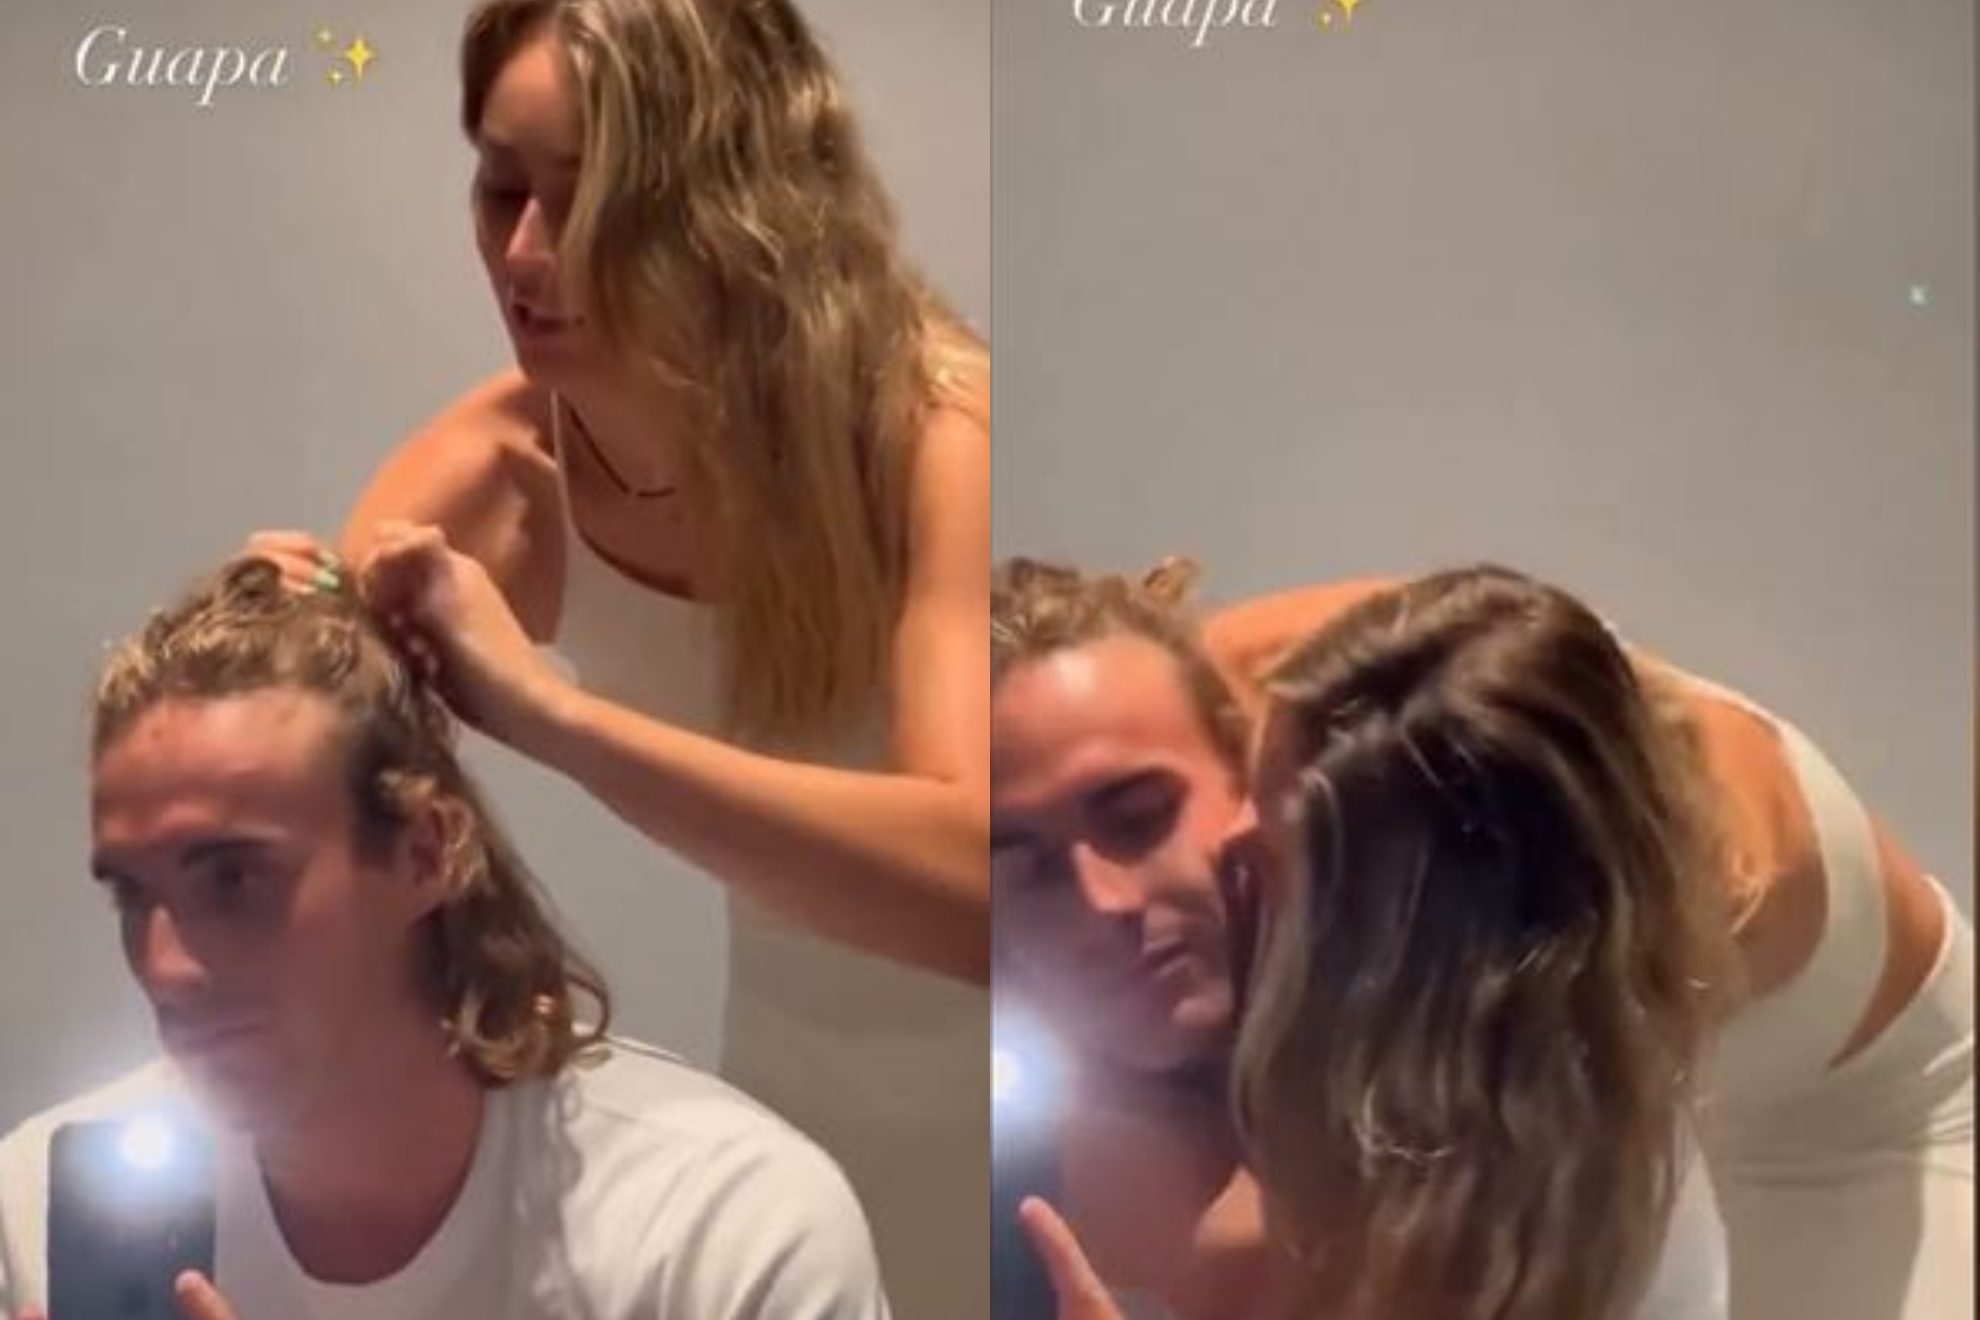 Badosa and Tsitsipas fuel rumours of their possible romance with an intimate video